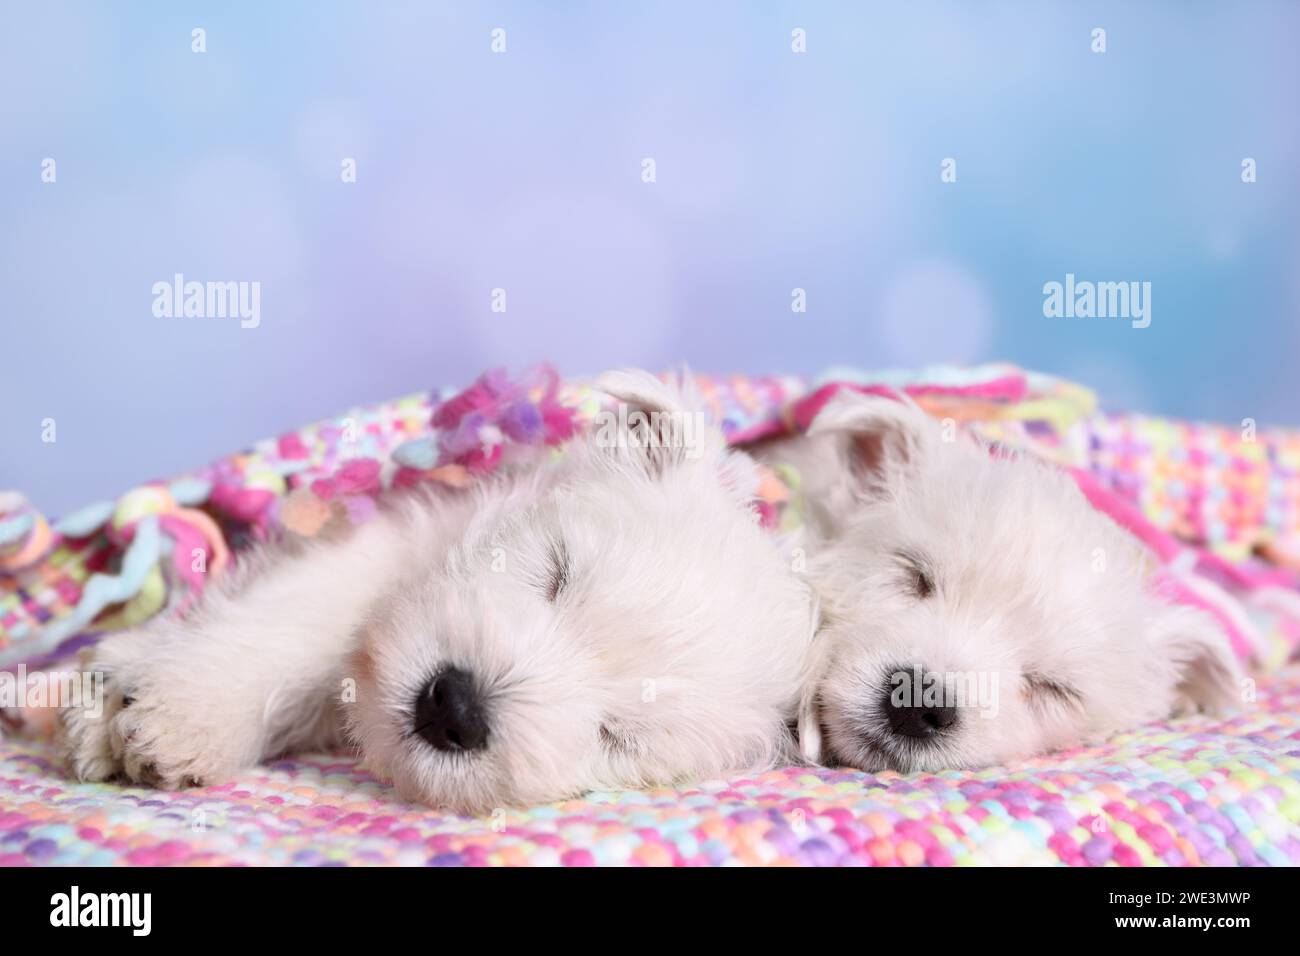 2 West Highland White Terrier Welpen / 2 West Highland White Terrier Puppies Banque D'Images